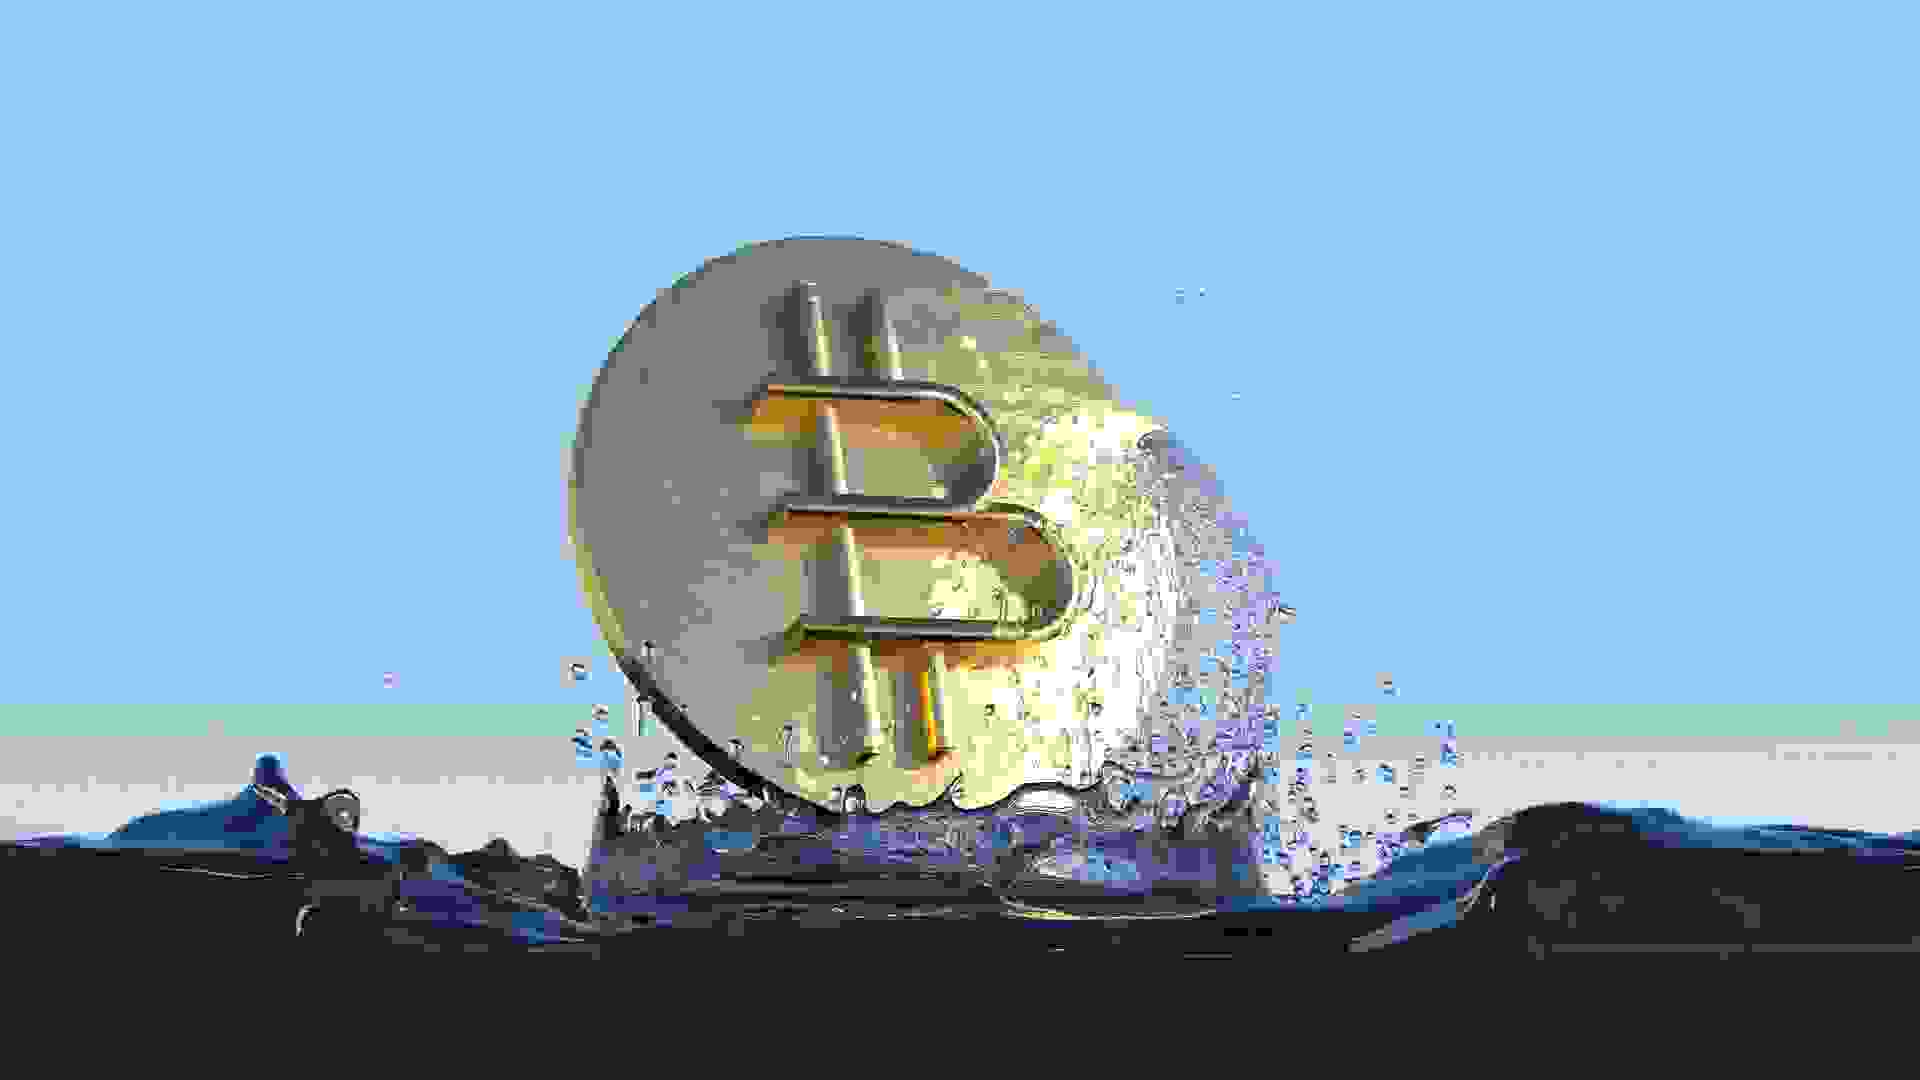 Floating Bitcoin business concept, crypto currency, bitcoin is growing, stocks and investments are coming up 3d render stock photo